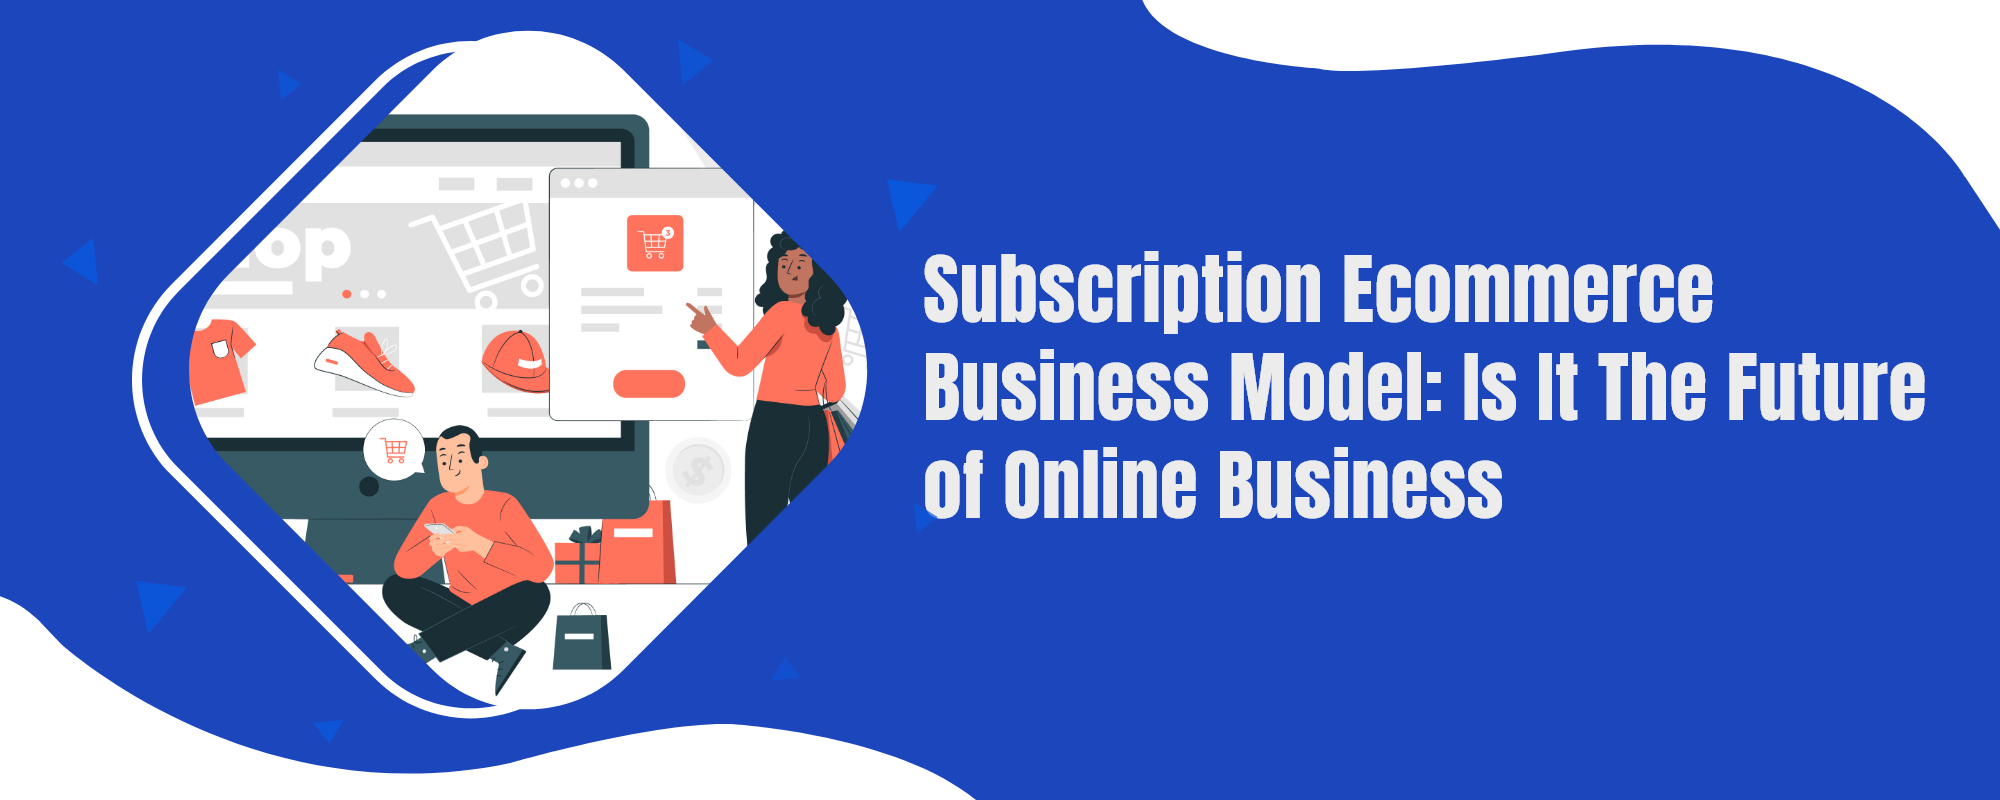 subscription ecommerce business model